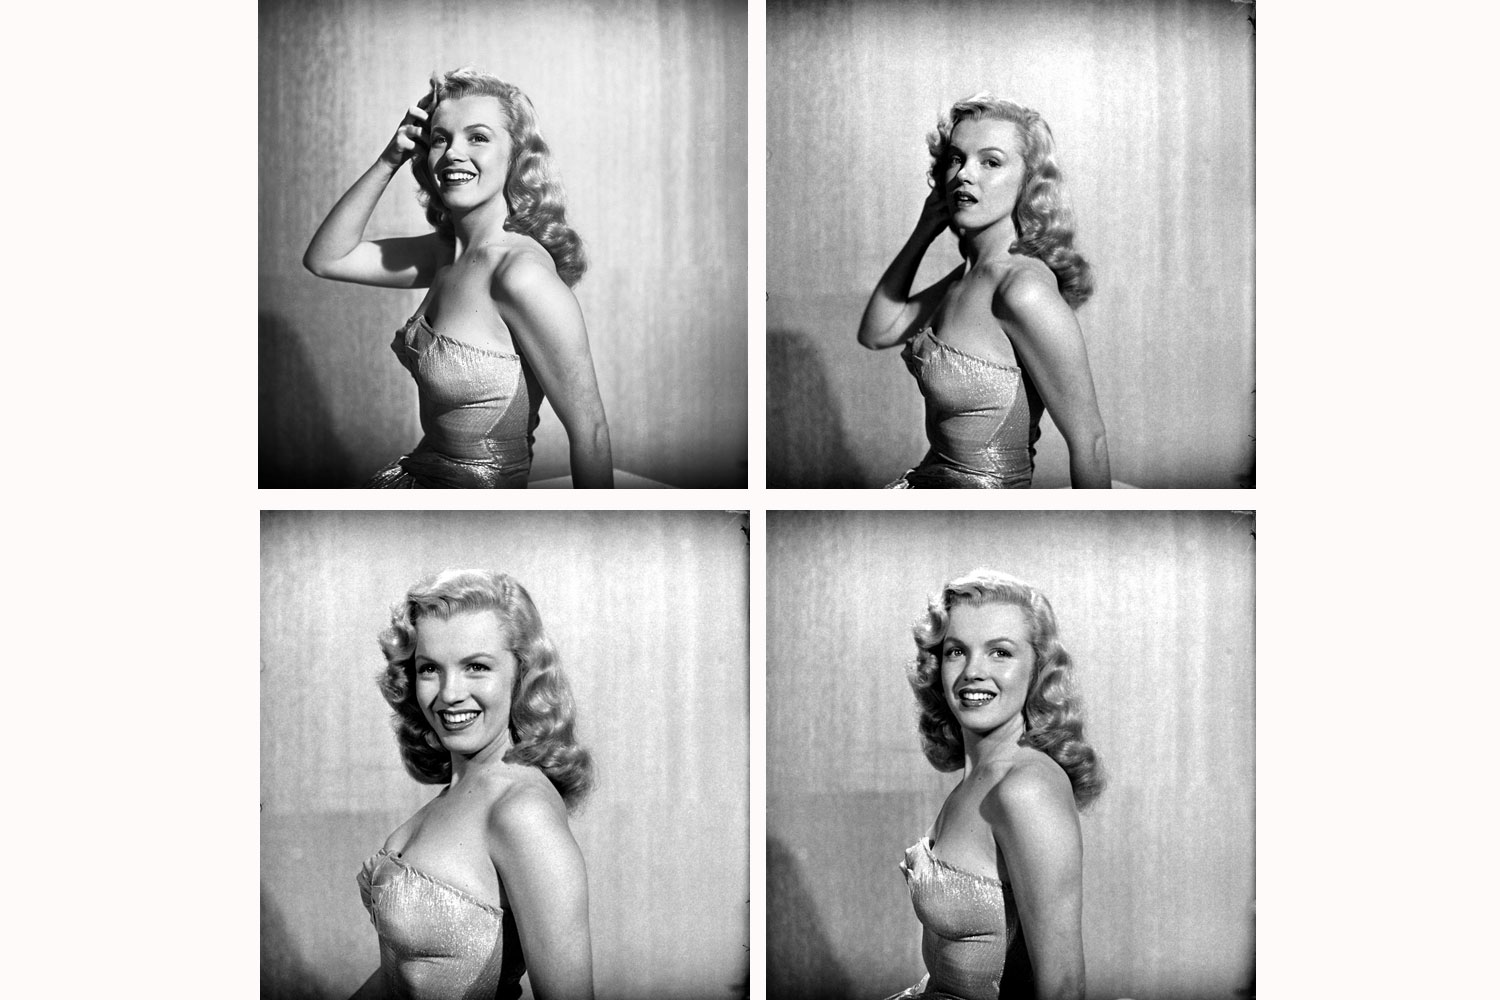 Four photographs of Marilyn Monroe at age 22, Hollywood, 1949.